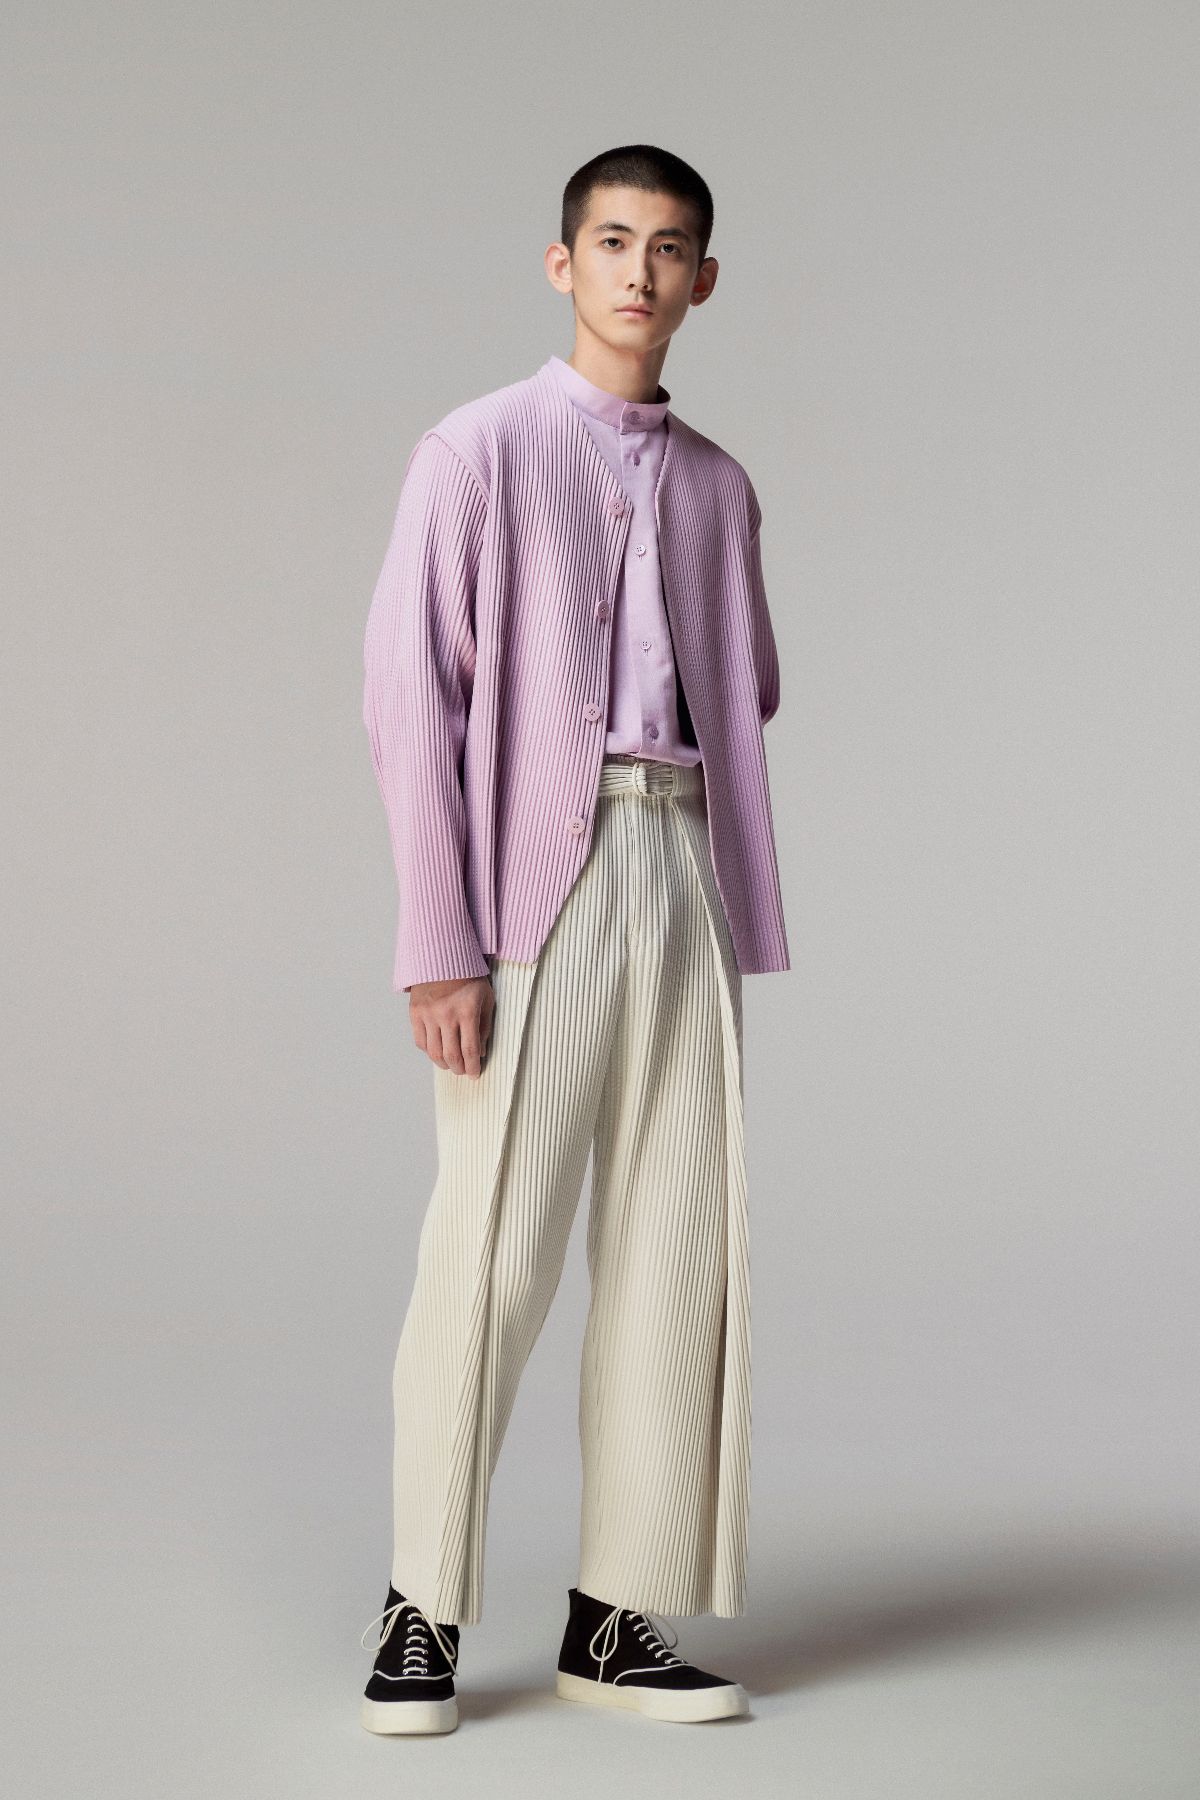 Homme Plissé Issey Miyake SS21 Is Everything Your Spring Wardrobe Needs